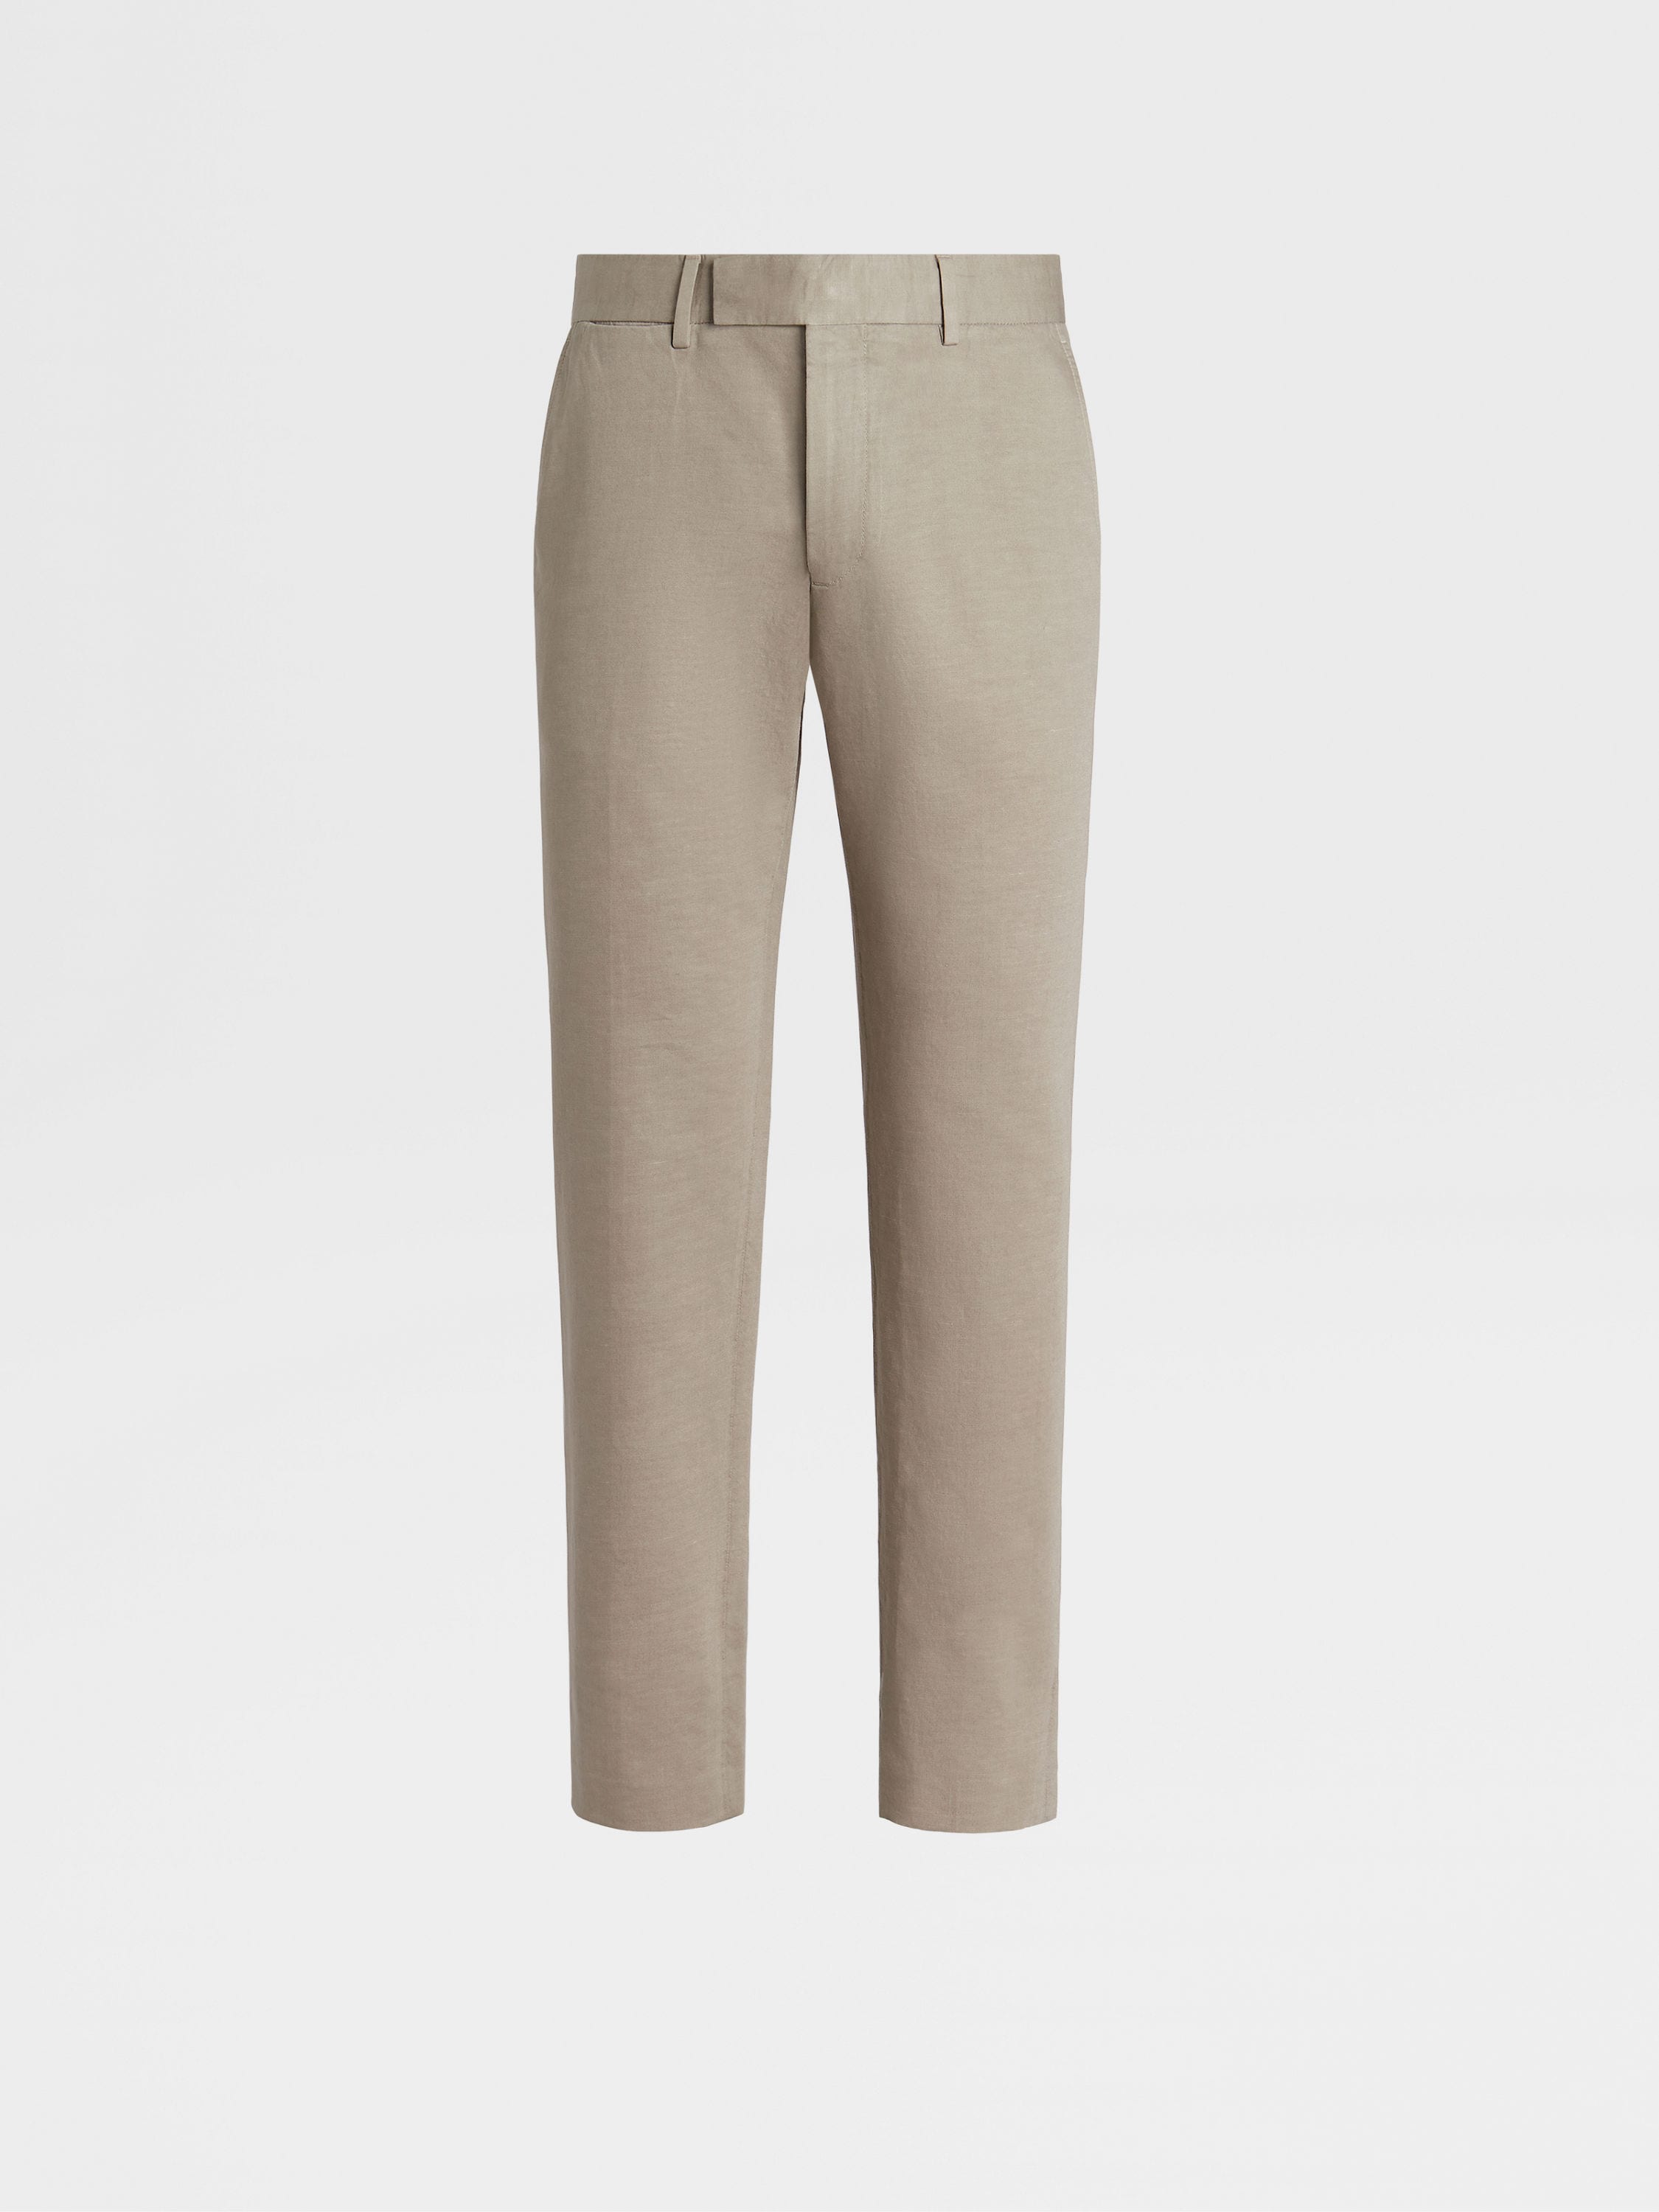 Light Grey Cotton and Linen Summer Chino Pants